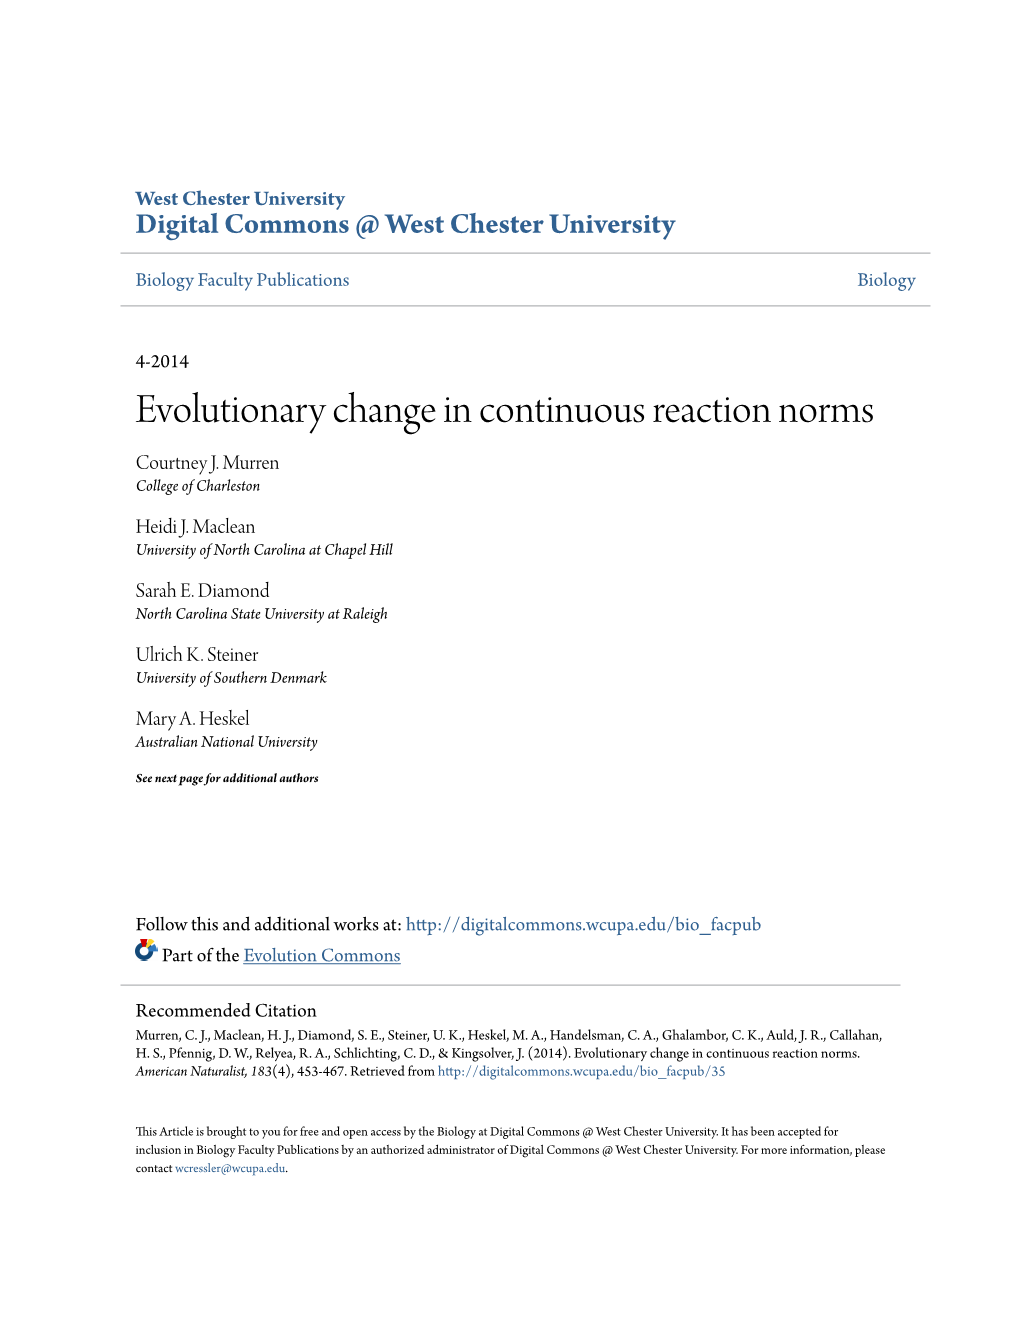 Evolutionary Change in Continuous Reaction Norms Courtney J